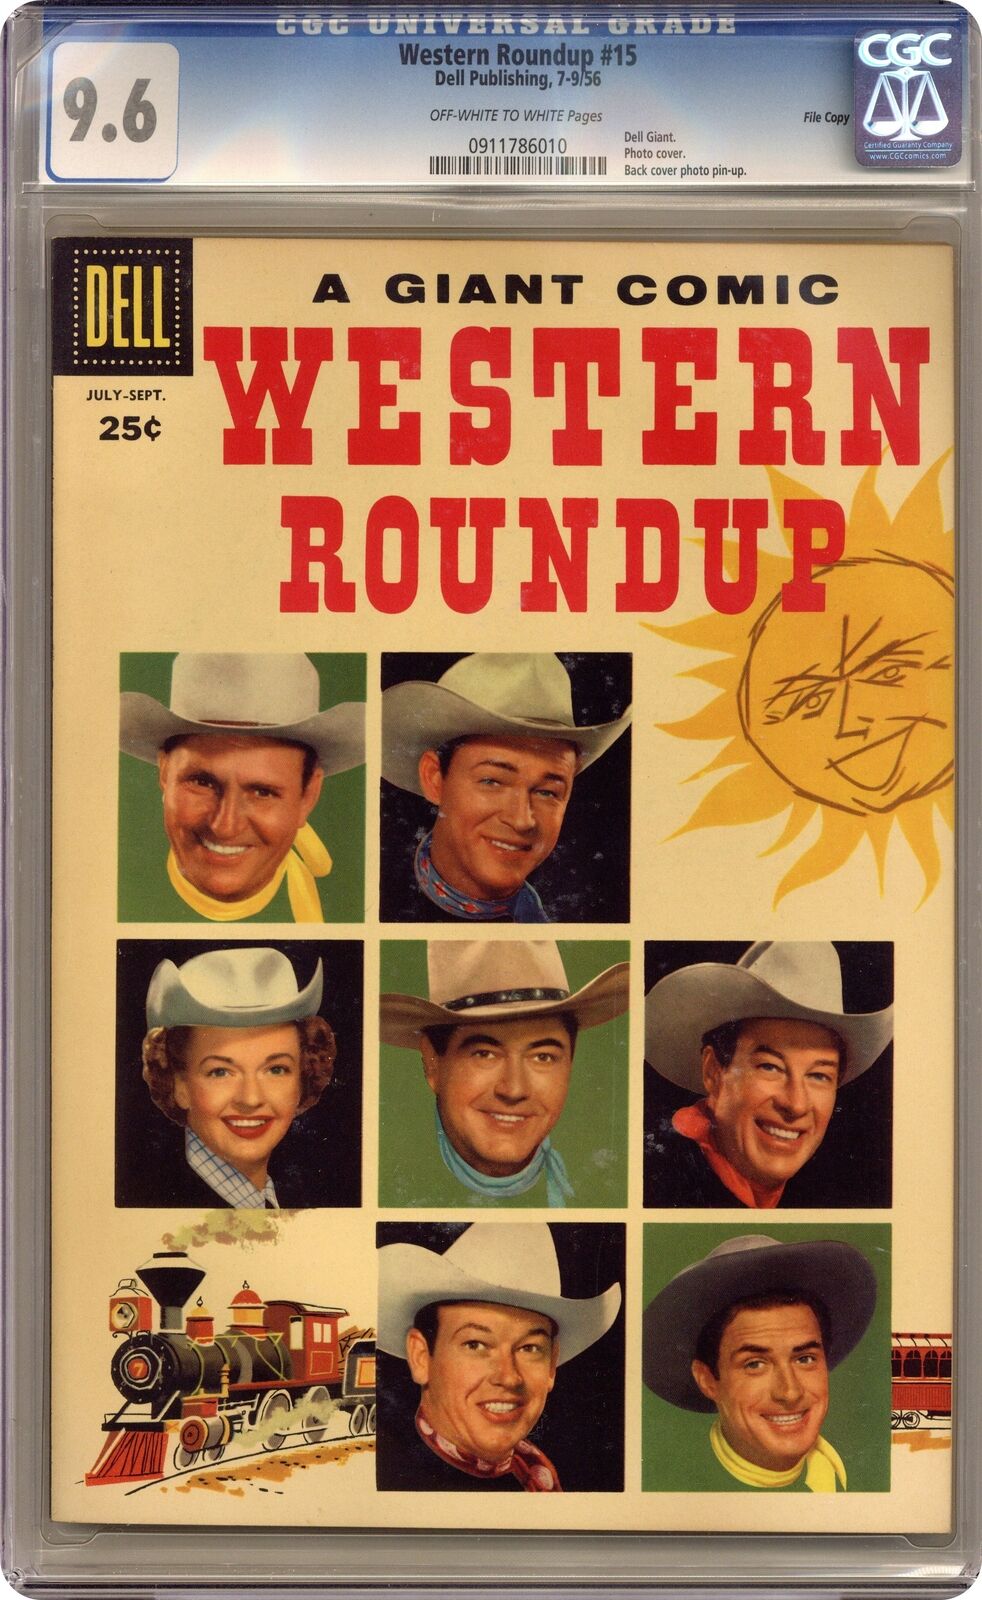 Dell Giant Western Roundup #15 CGC 9.6 1956 0911786010